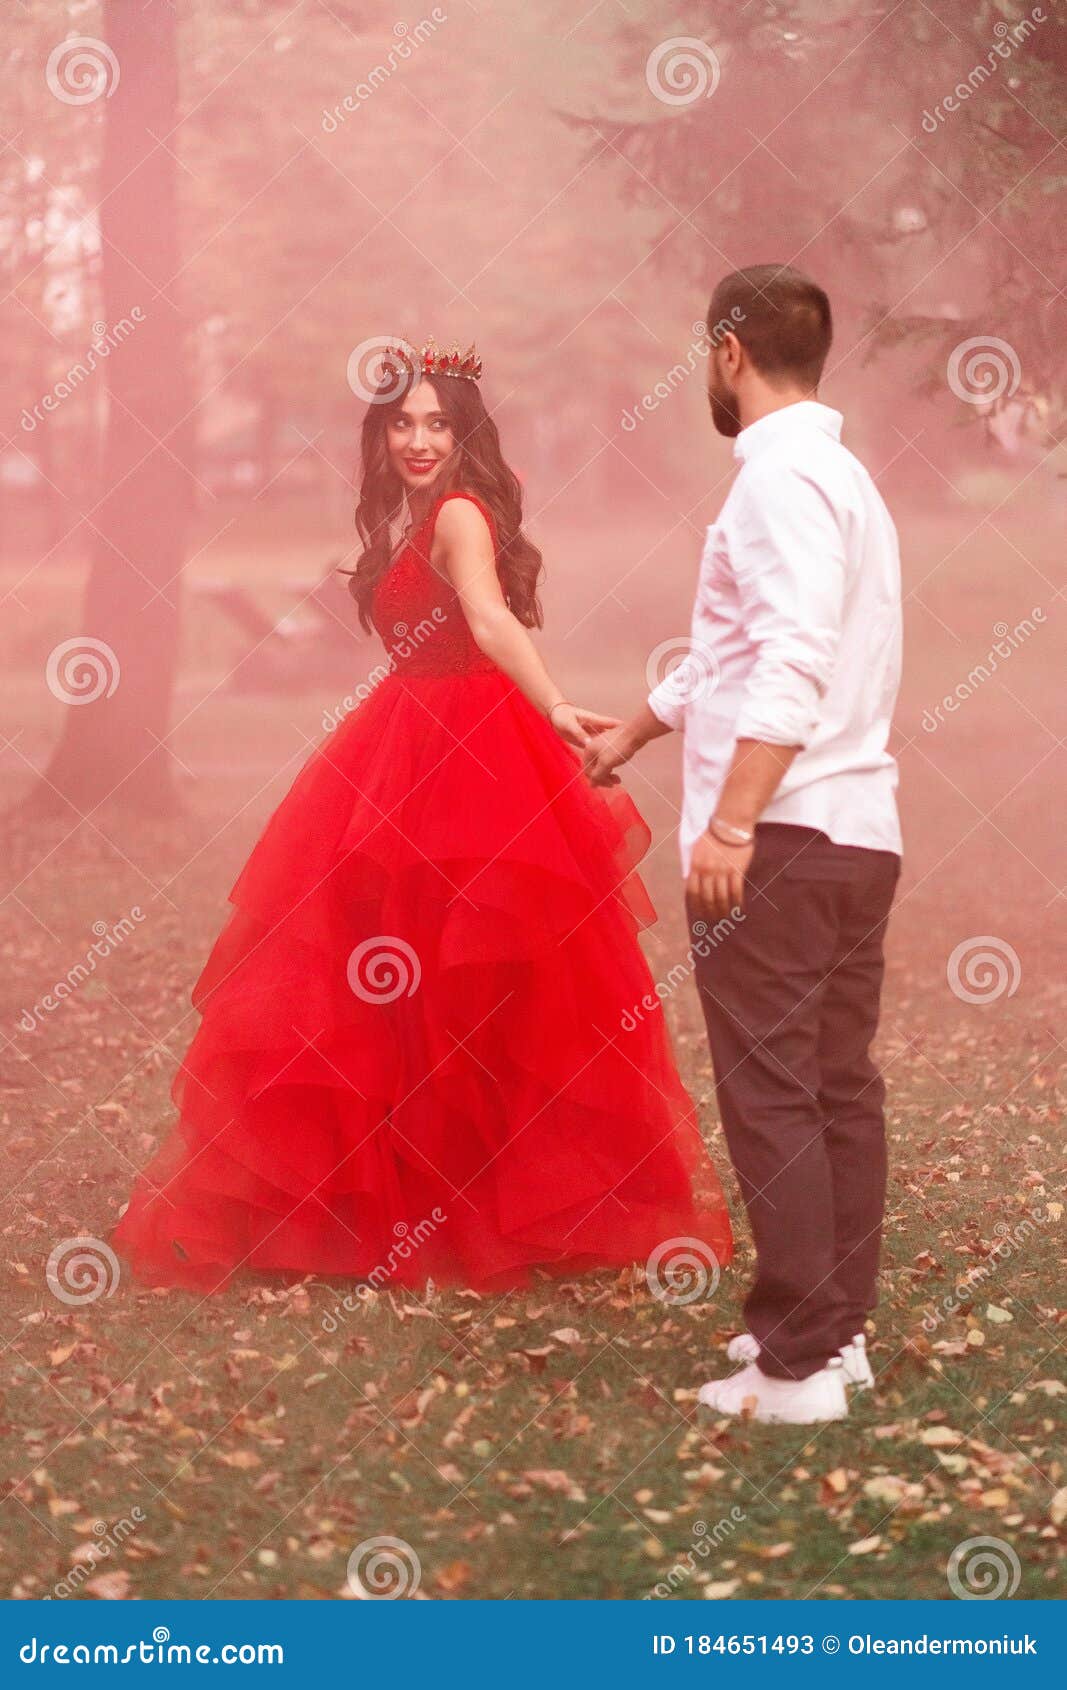 Models Posing in Red Wedding Dress and Tuxedo by River · Free Stock Photo